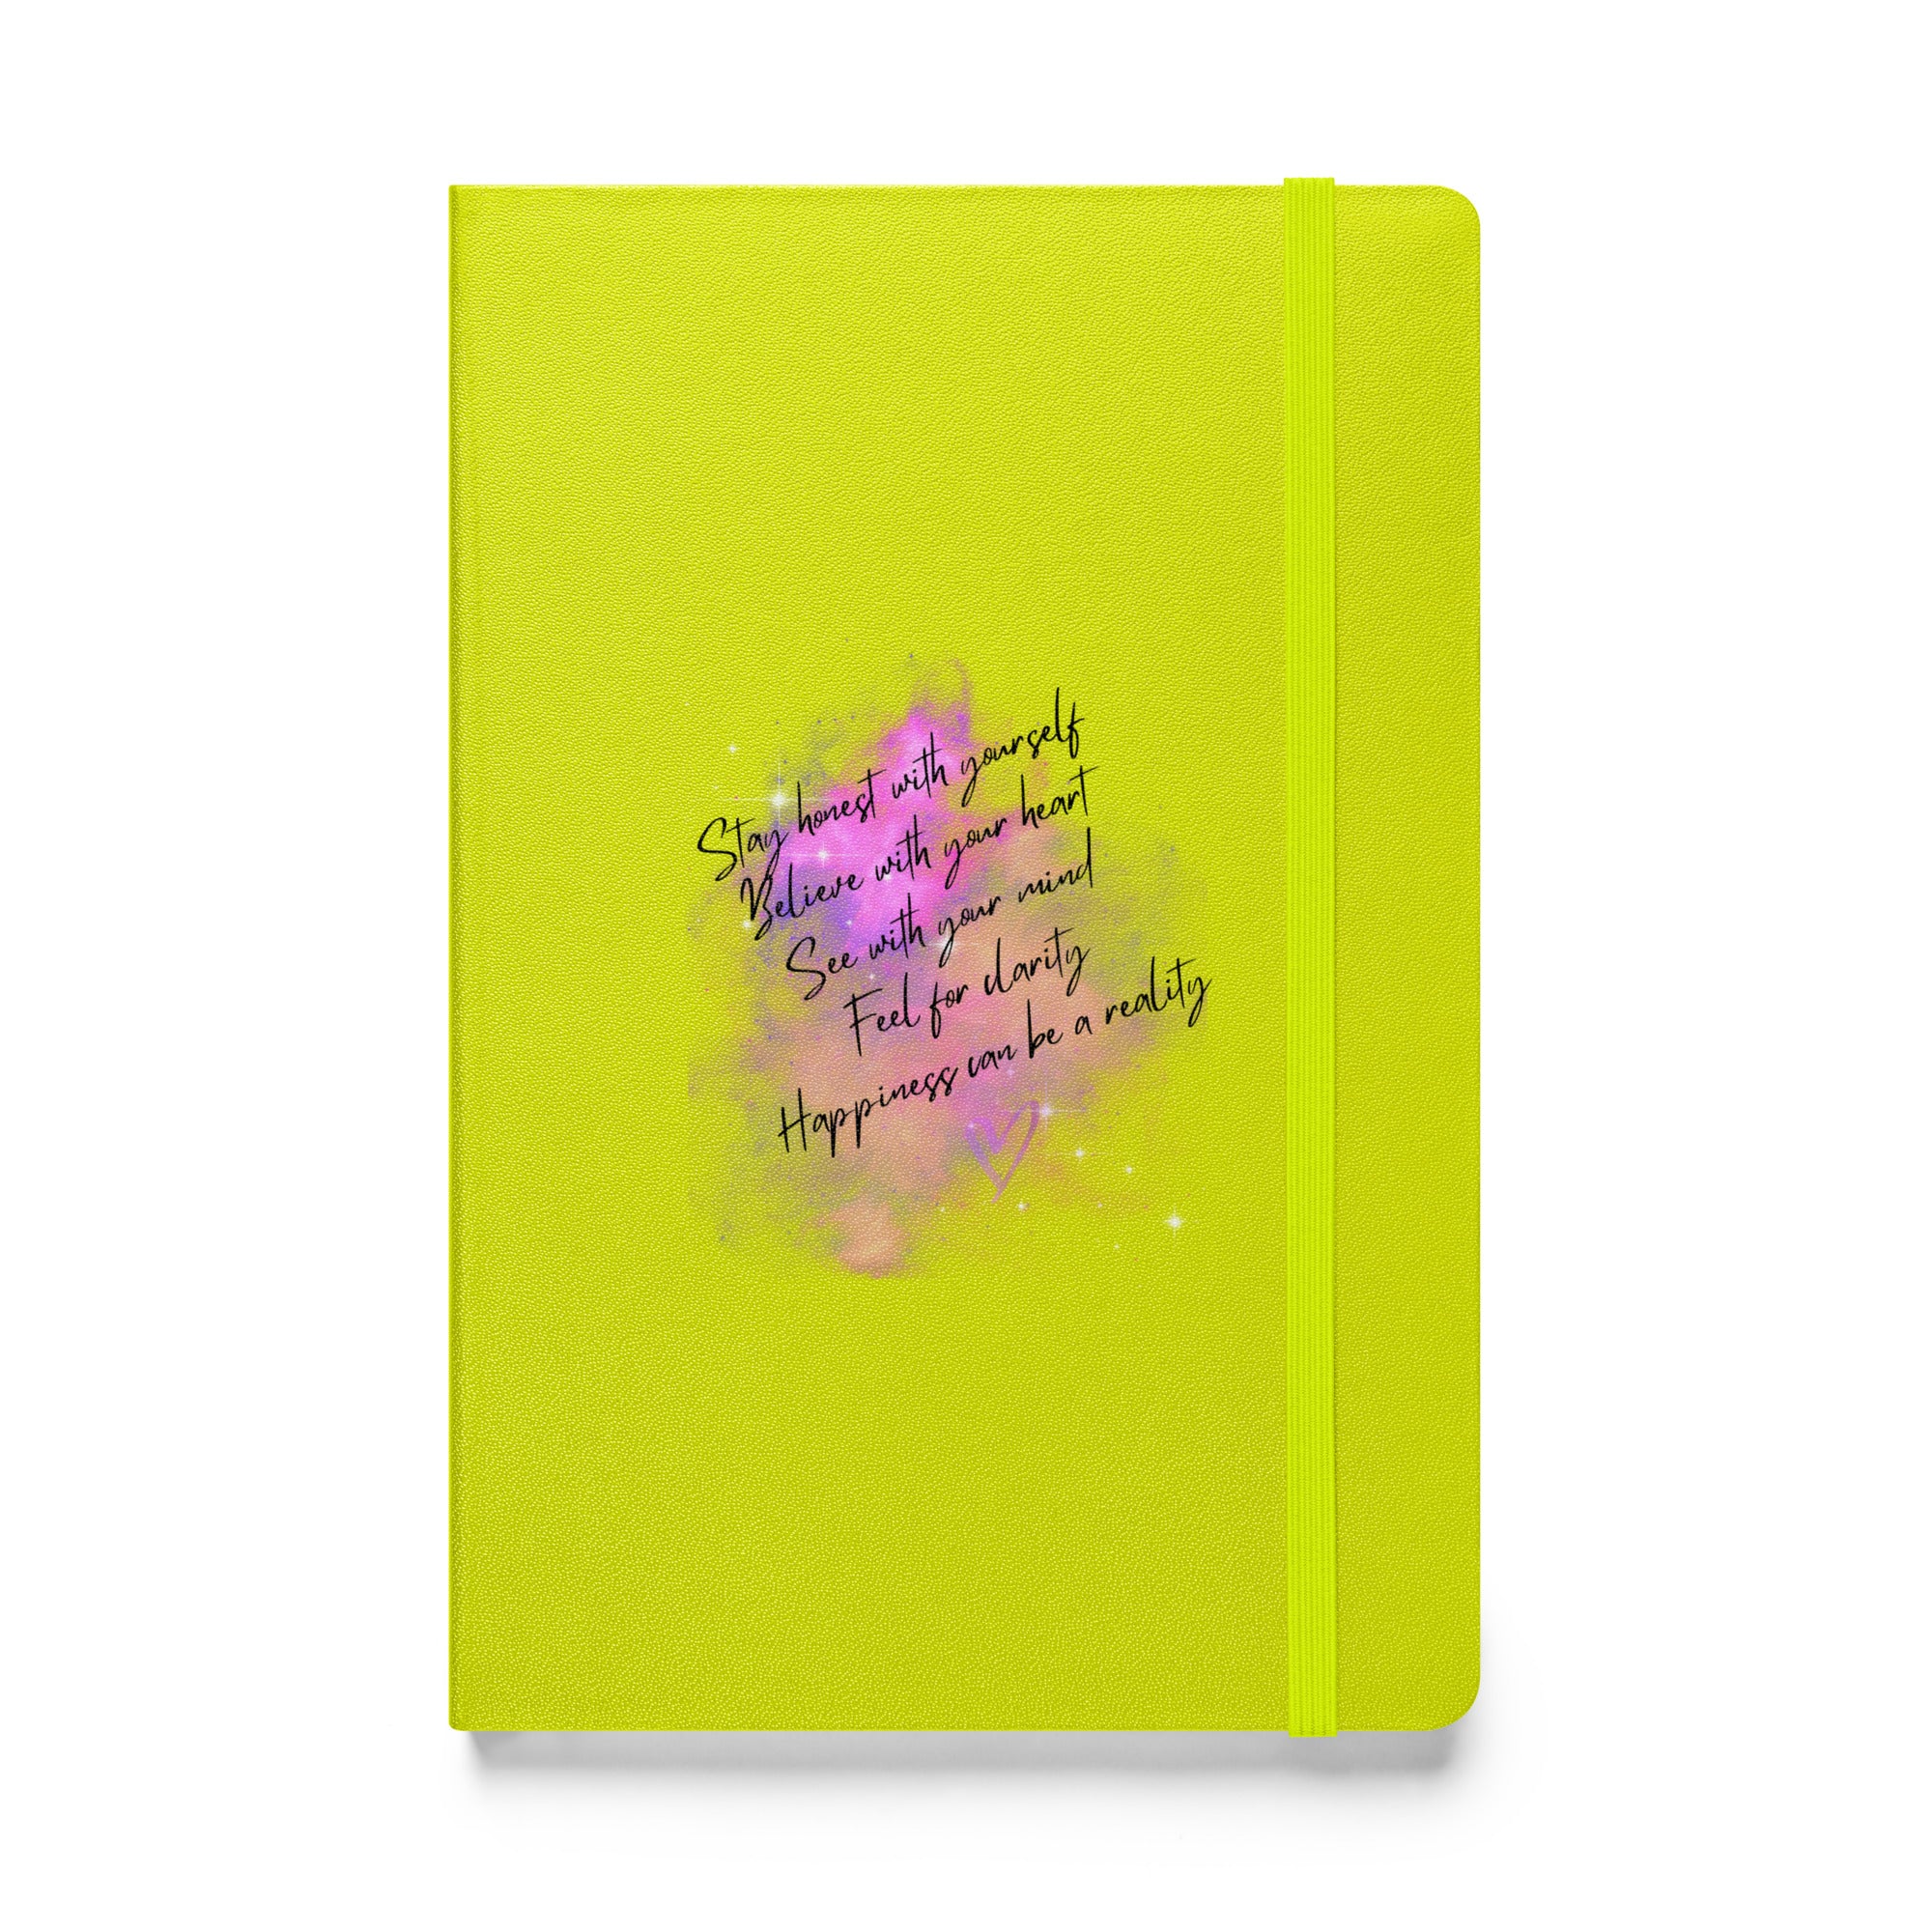 My Happiness Hardcover bound notebook